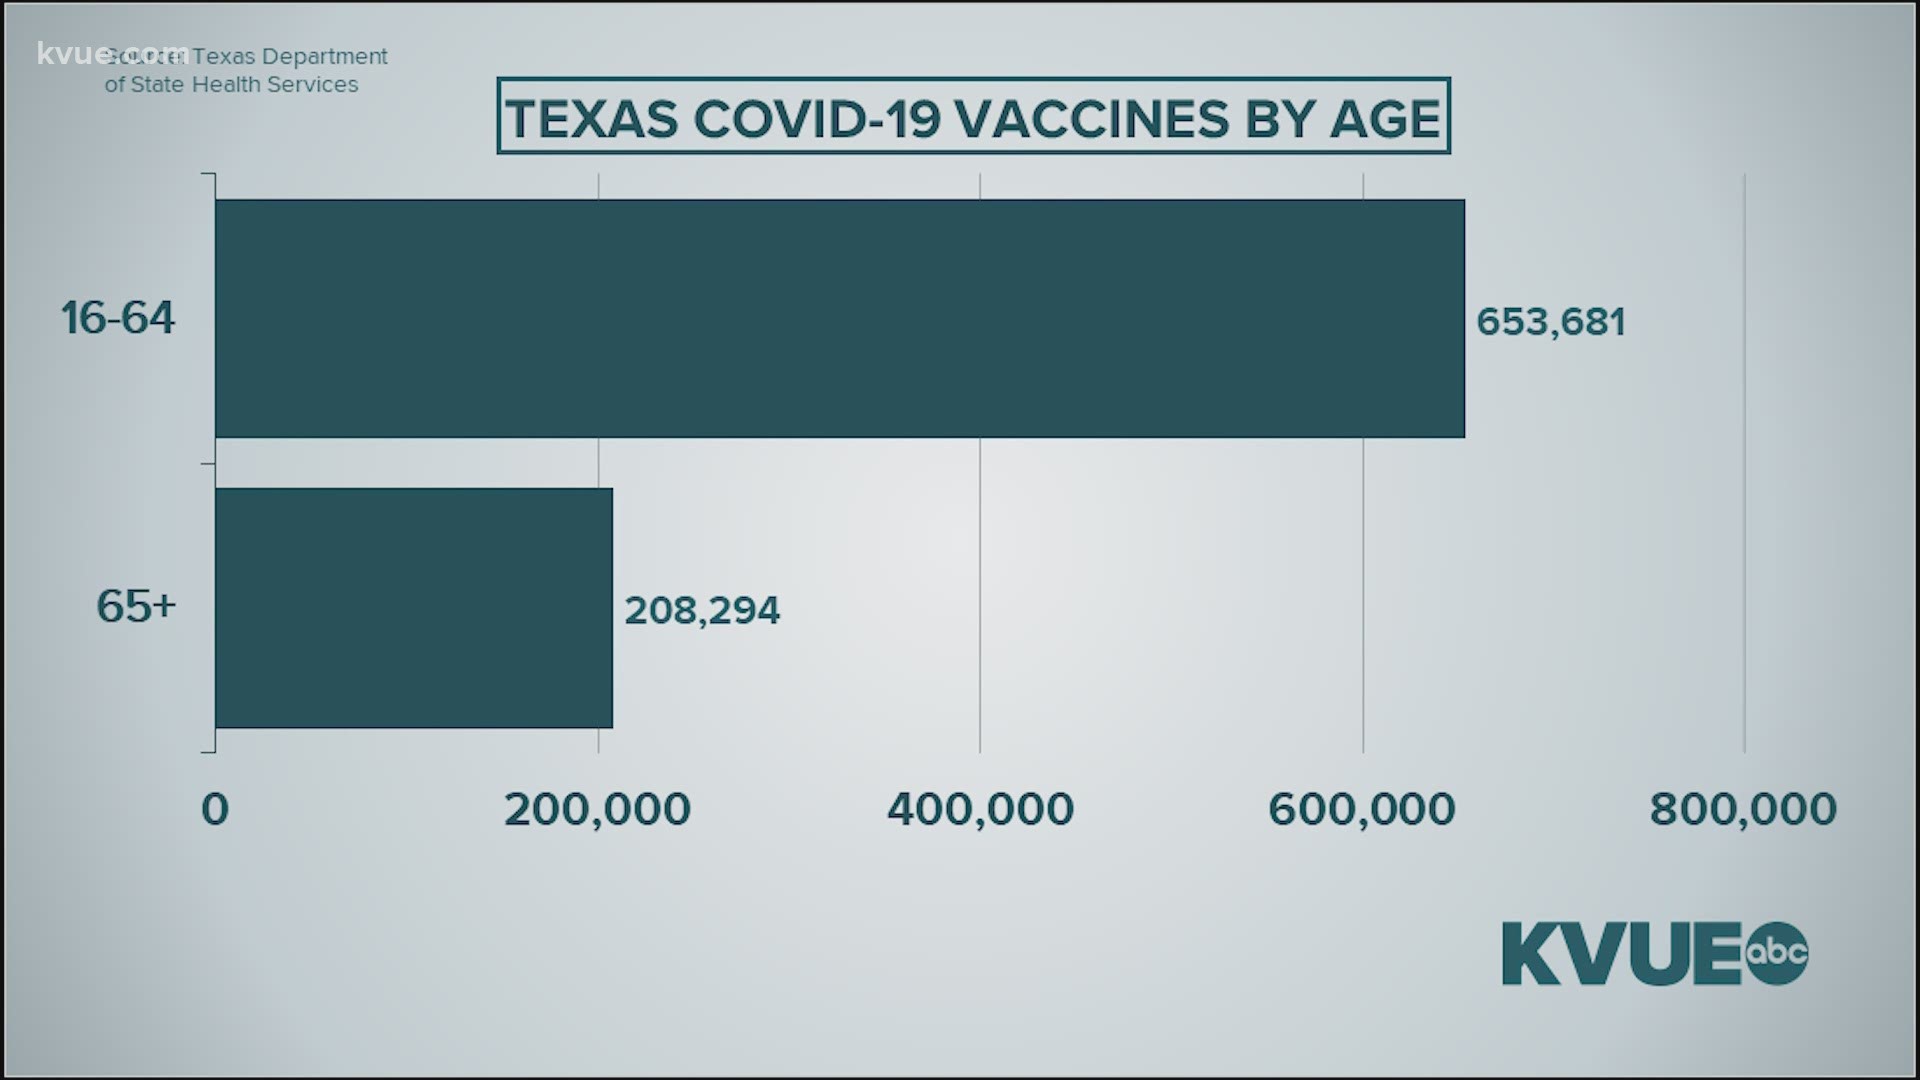 A lot of seniors in Texas have voiced concerns about how difficult it has been to get the COVID-19 vaccine.